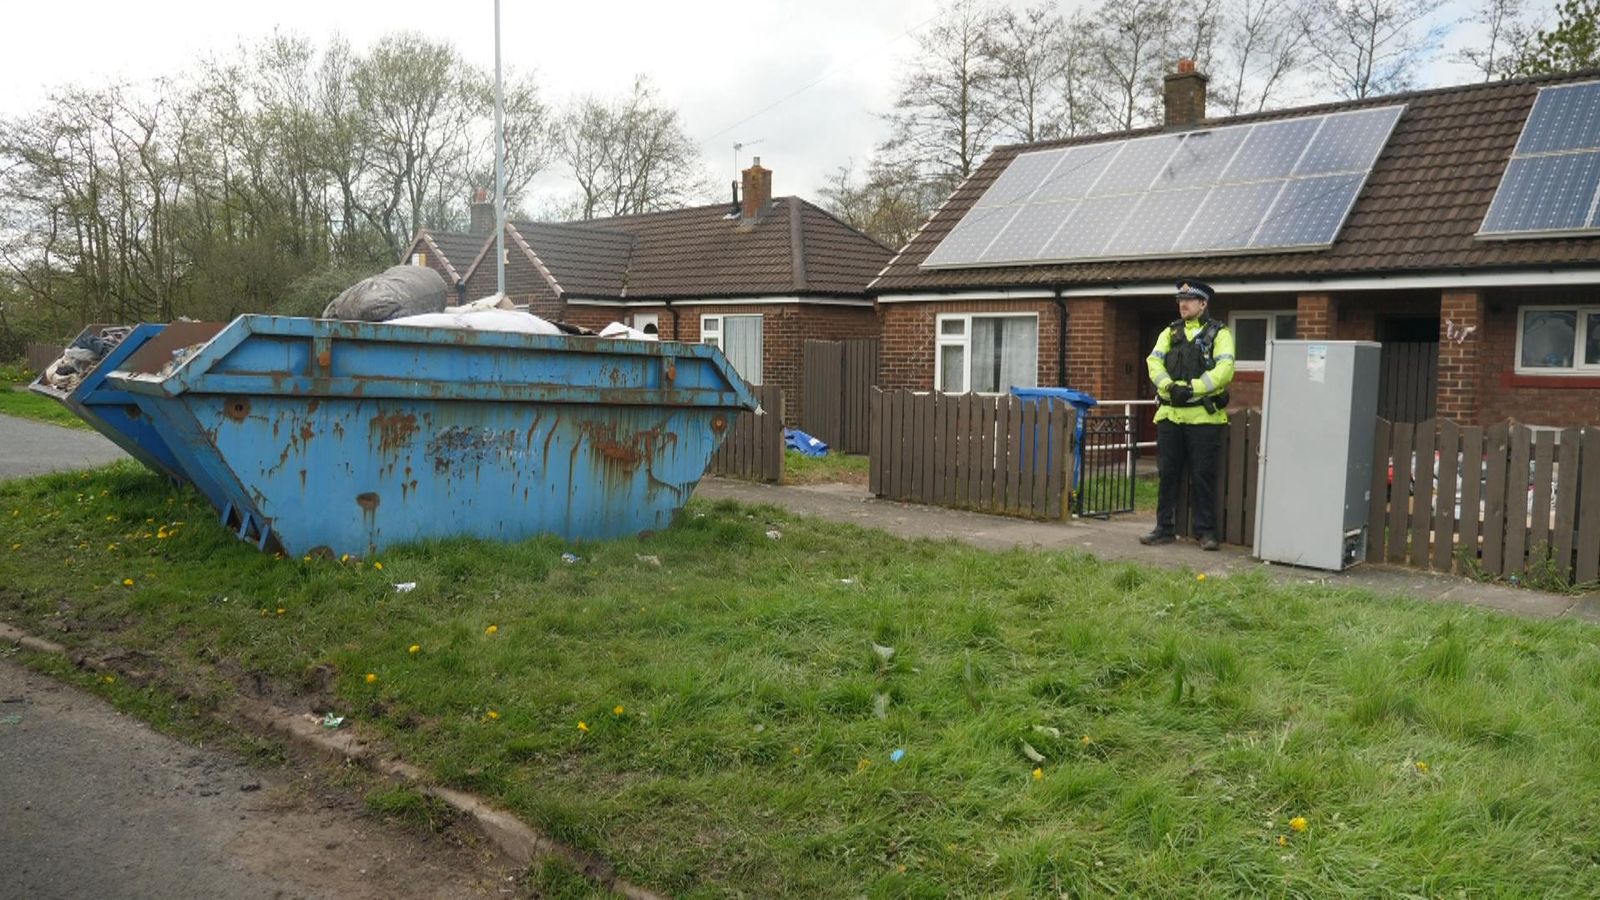 Five people arrested after police discover 'human remains of young baby' in Wigan